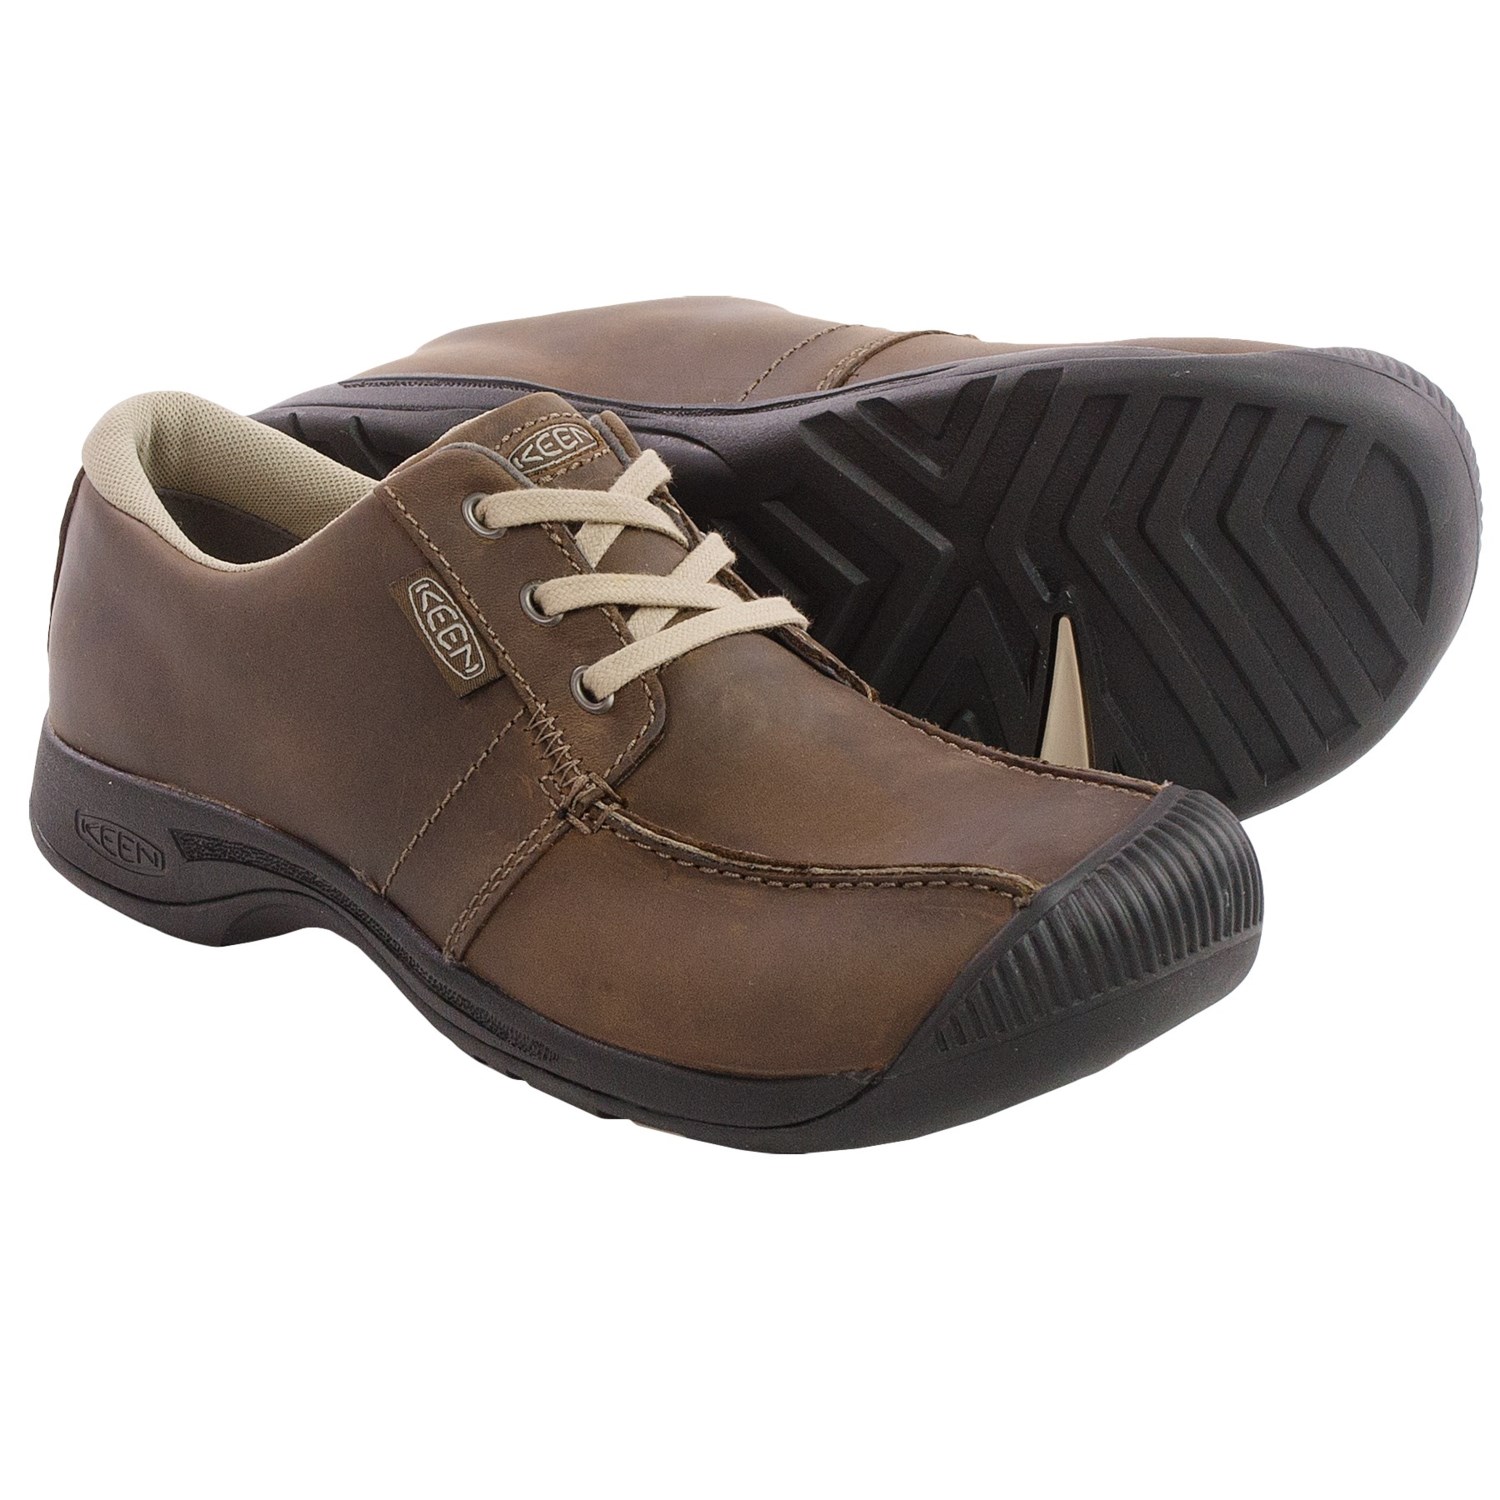 Keen Reisen Low Oxford Shoes (For Men) 111NH - Save 41%